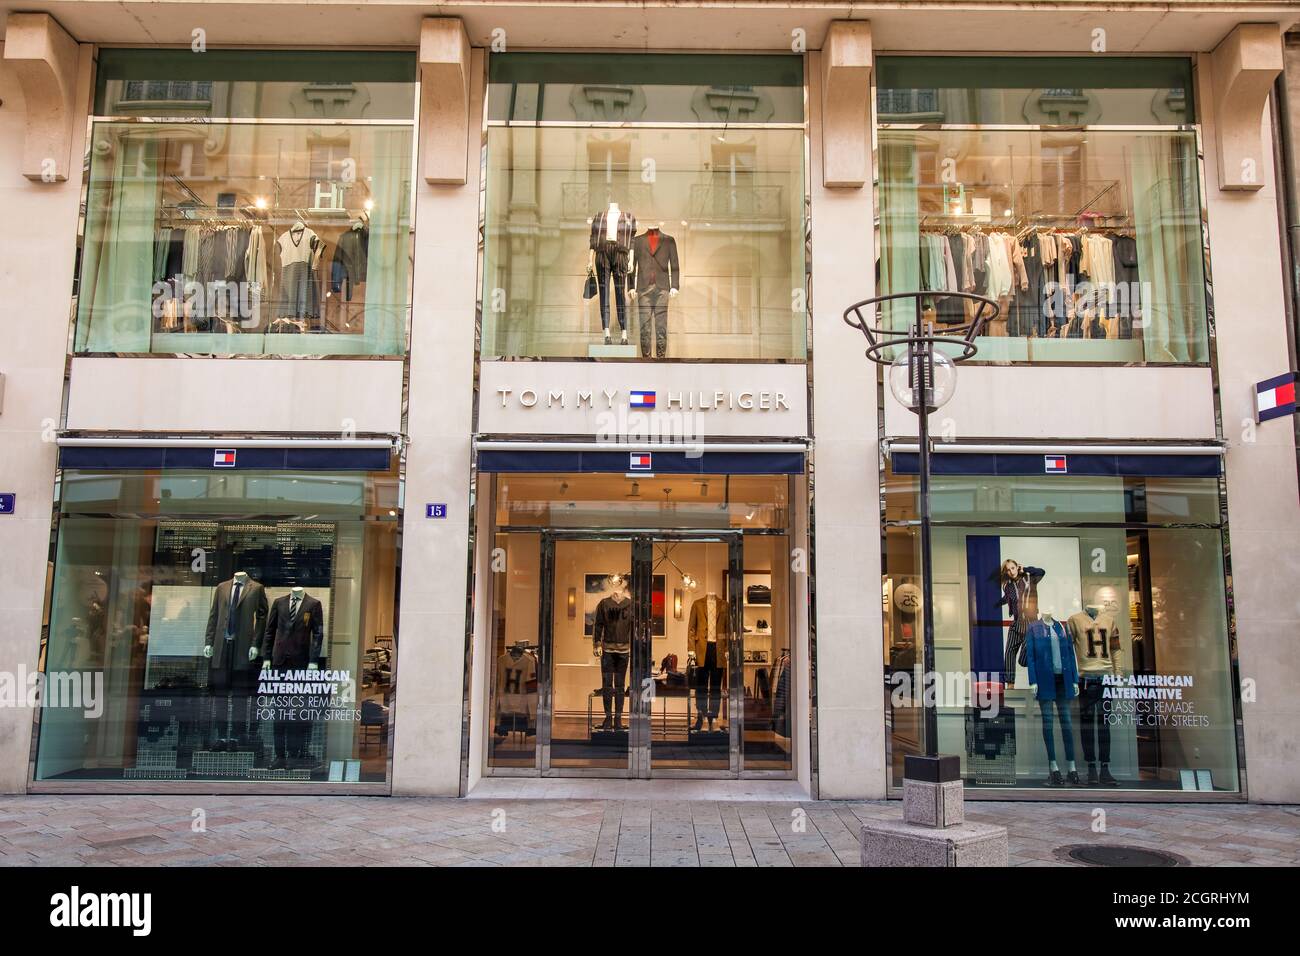 Geneva, Switzerland - August 27, 2017 : Tommy Hilfiger store in Les Rues  Basses in Geneva. Les Rues Basses, located at the foot of the old town, is  Ge Stock Photo - Alamy